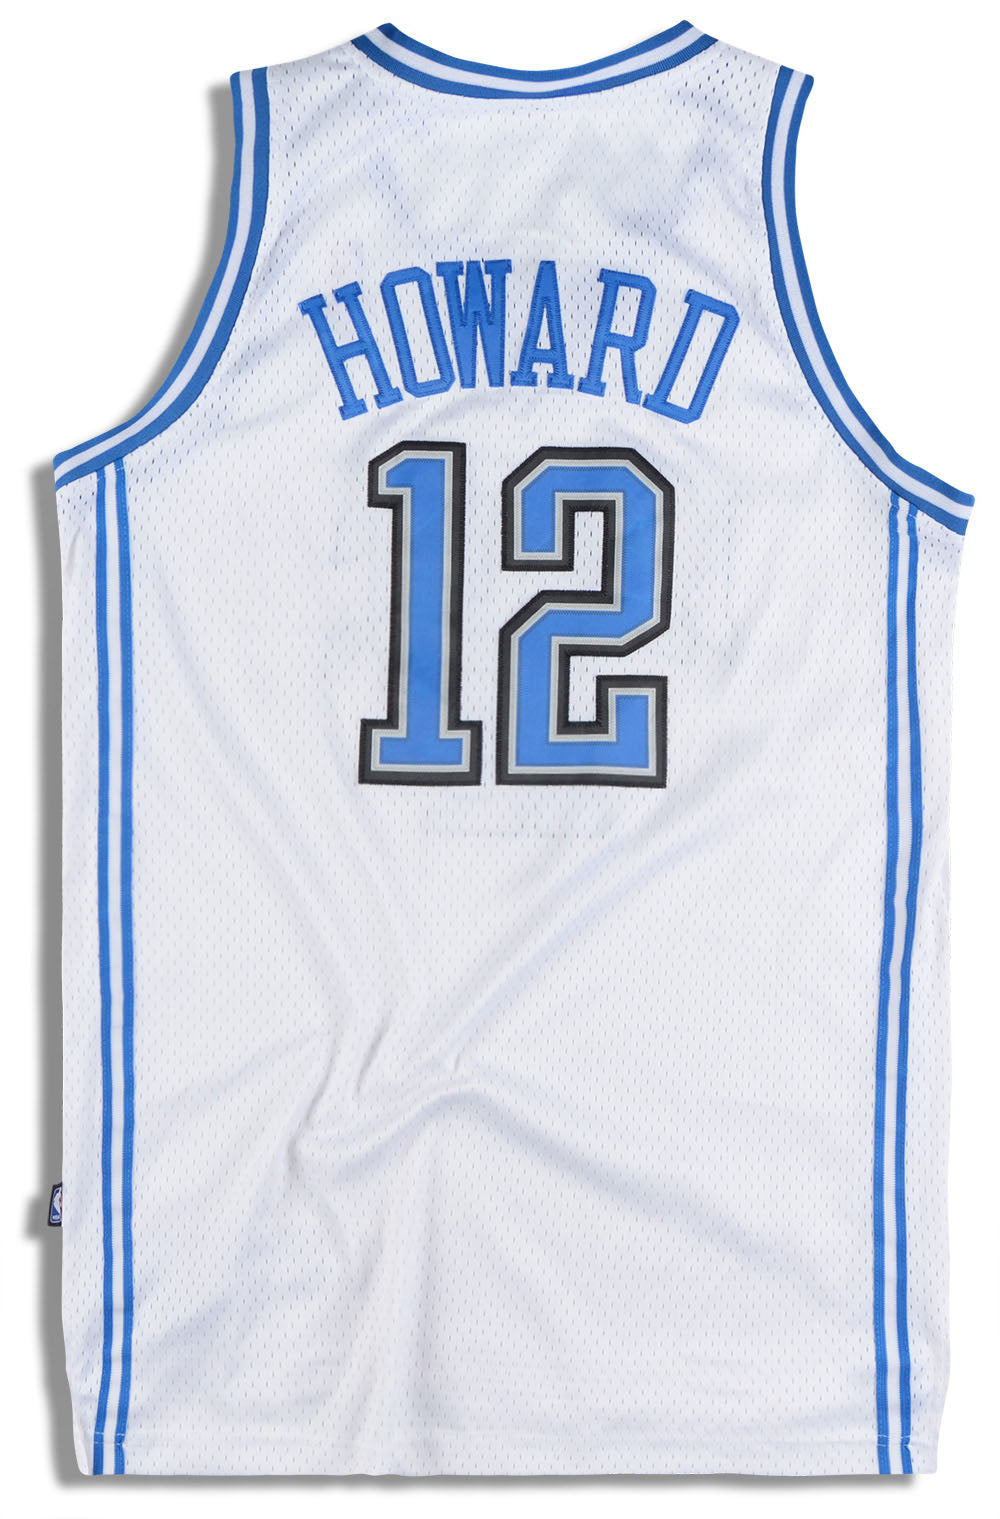 2011-12 Orlando Magic Dwight Howard #12 Game Used White Practice Jersey 4XL  1